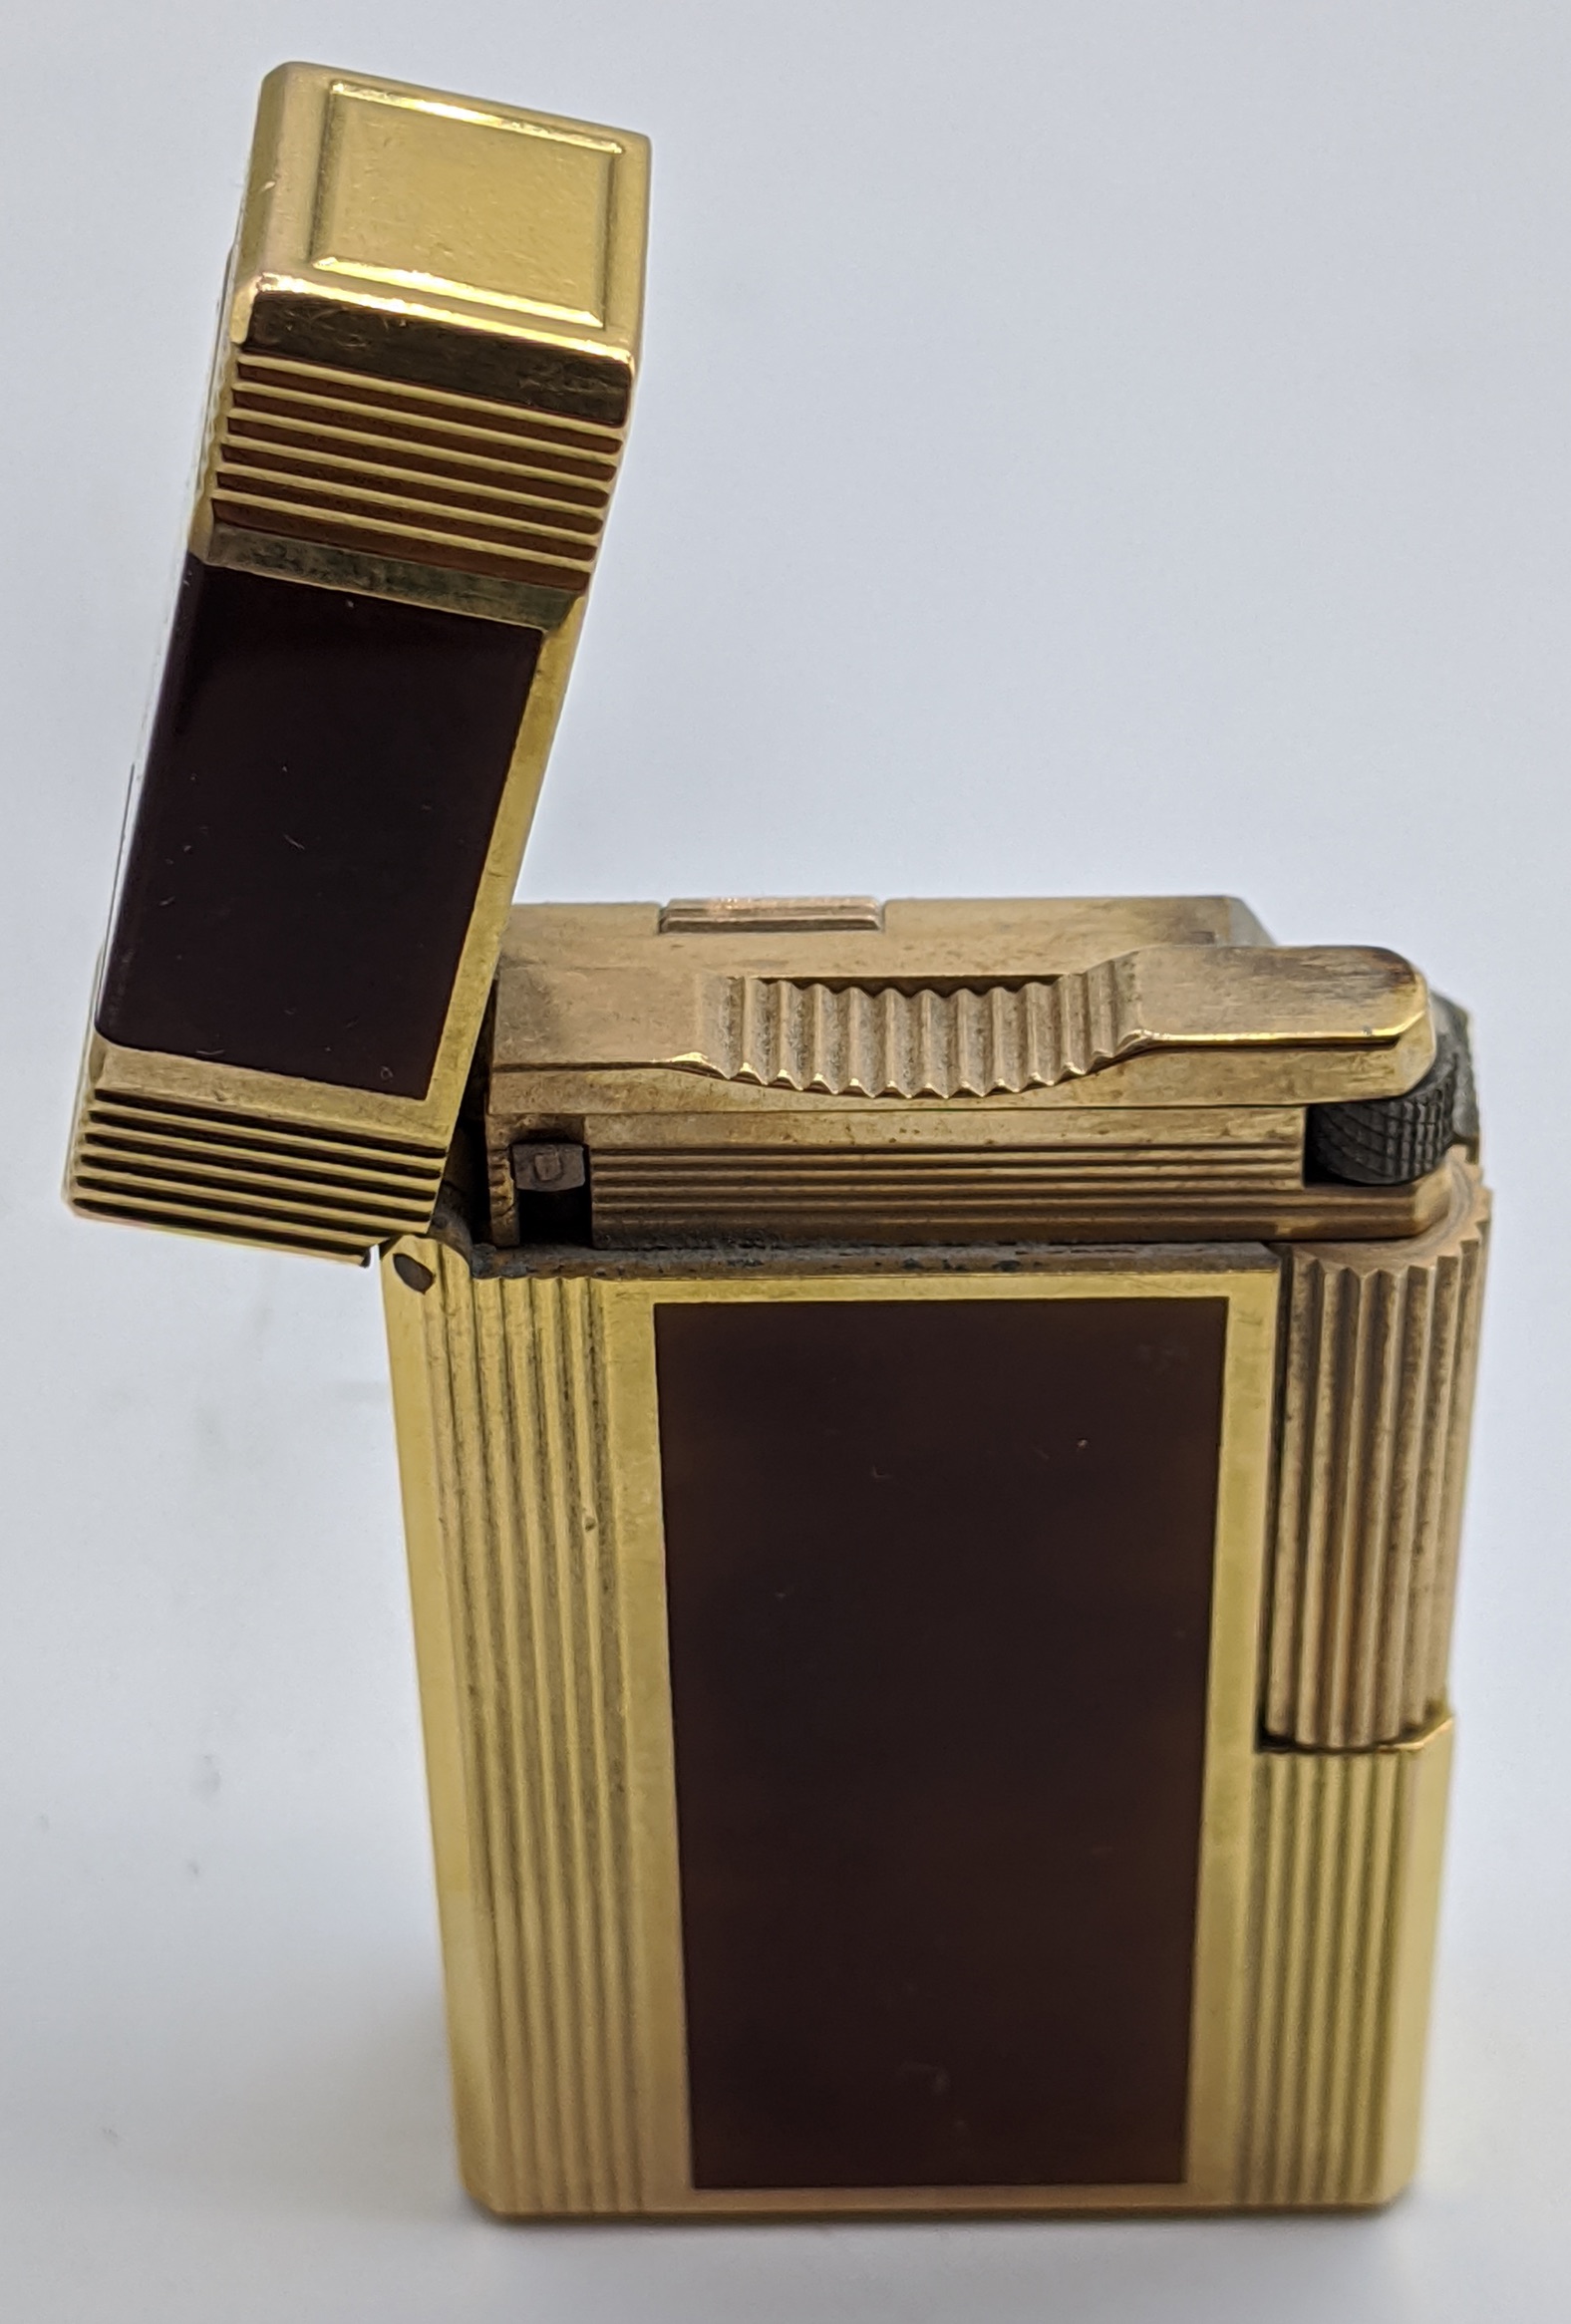 S.T. Dupont gold plated lighter, laque de chine edition - Image 4 of 4